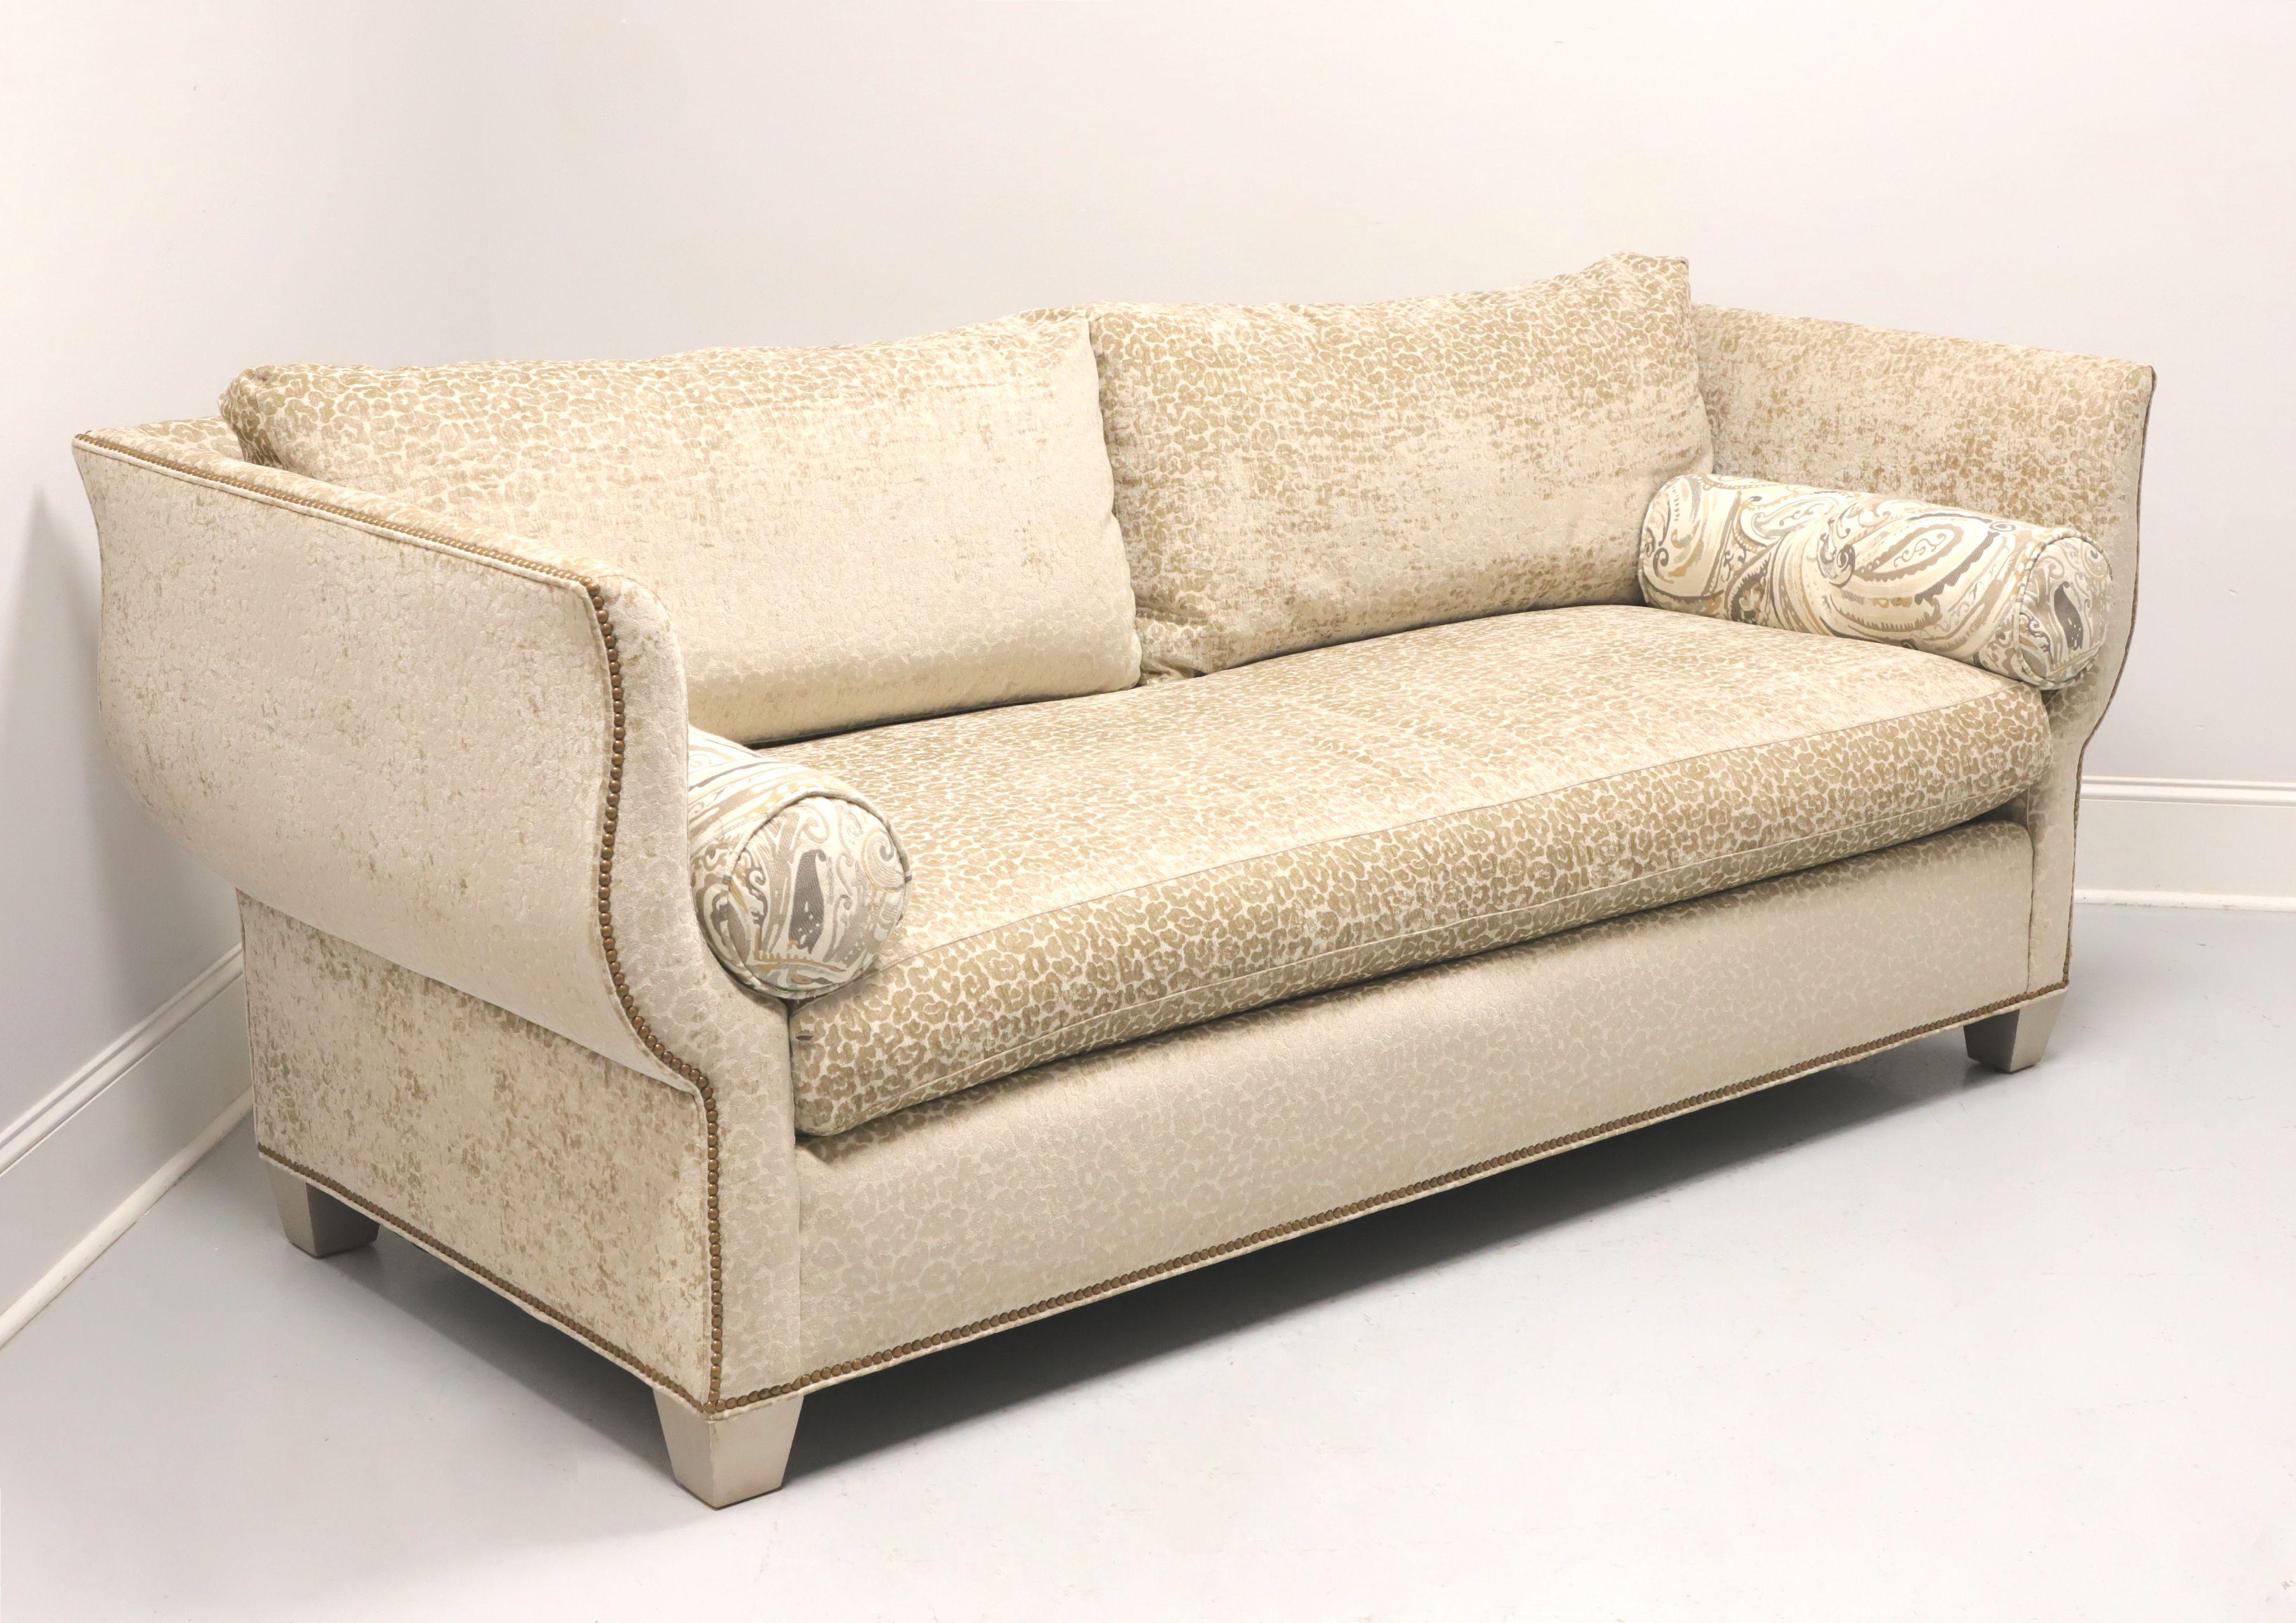 A Transitional style sofa by Hickory White Furniture. Hardwood frame construction; upholstered in a soft velvety beige color textured leopard print fabric, Knole style arms & back, brass nailhead trim, single reversible bottom cushion, Dual